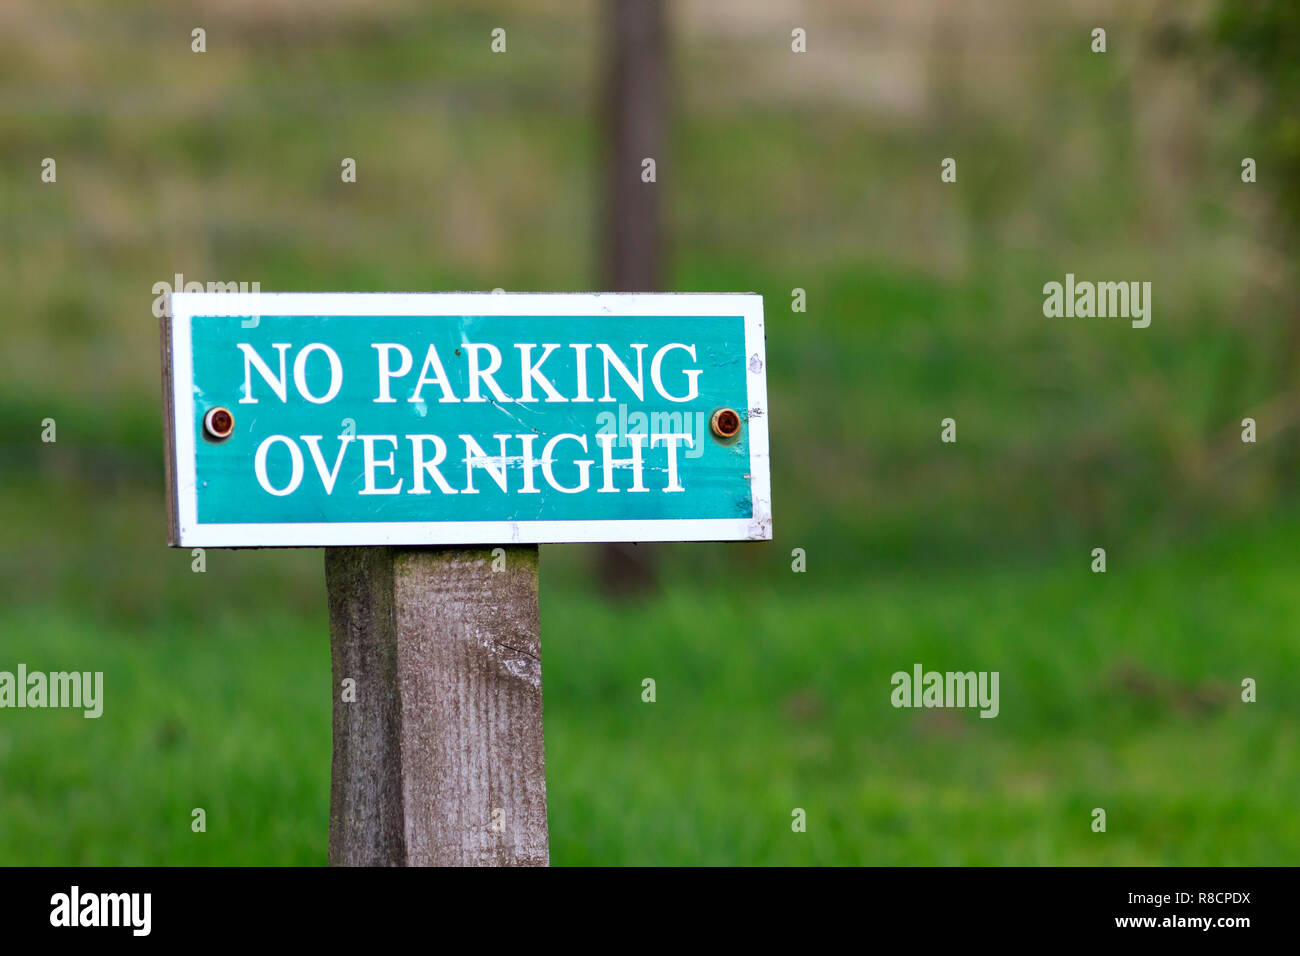 No parking overnight sign Stock Photo